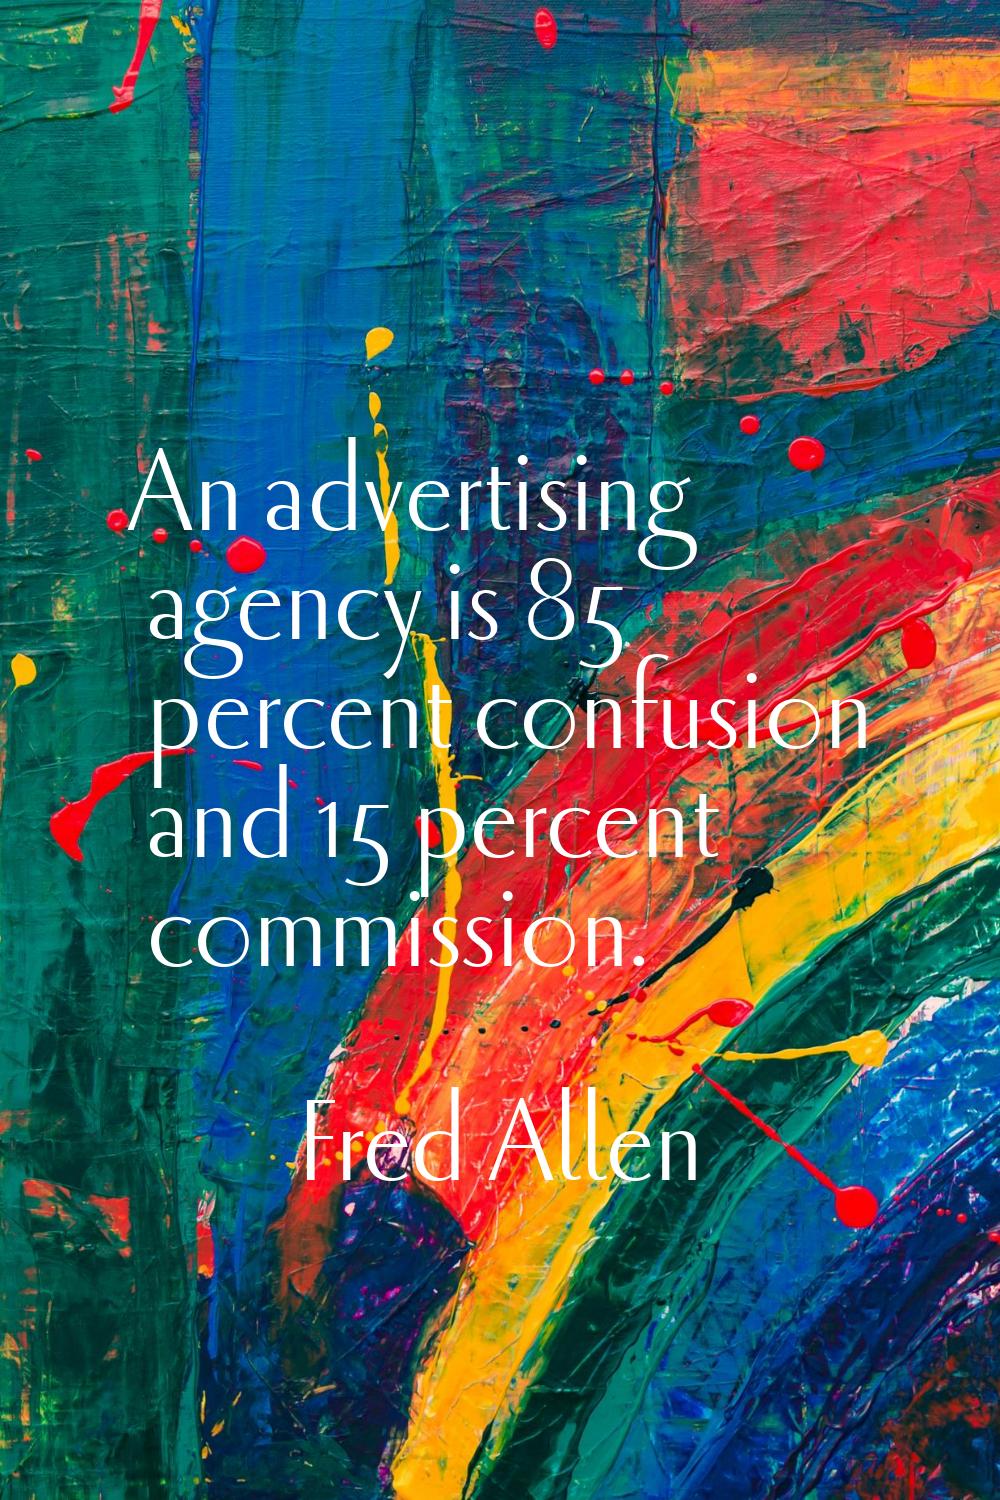 An advertising agency is 85 percent confusion and 15 percent commission.